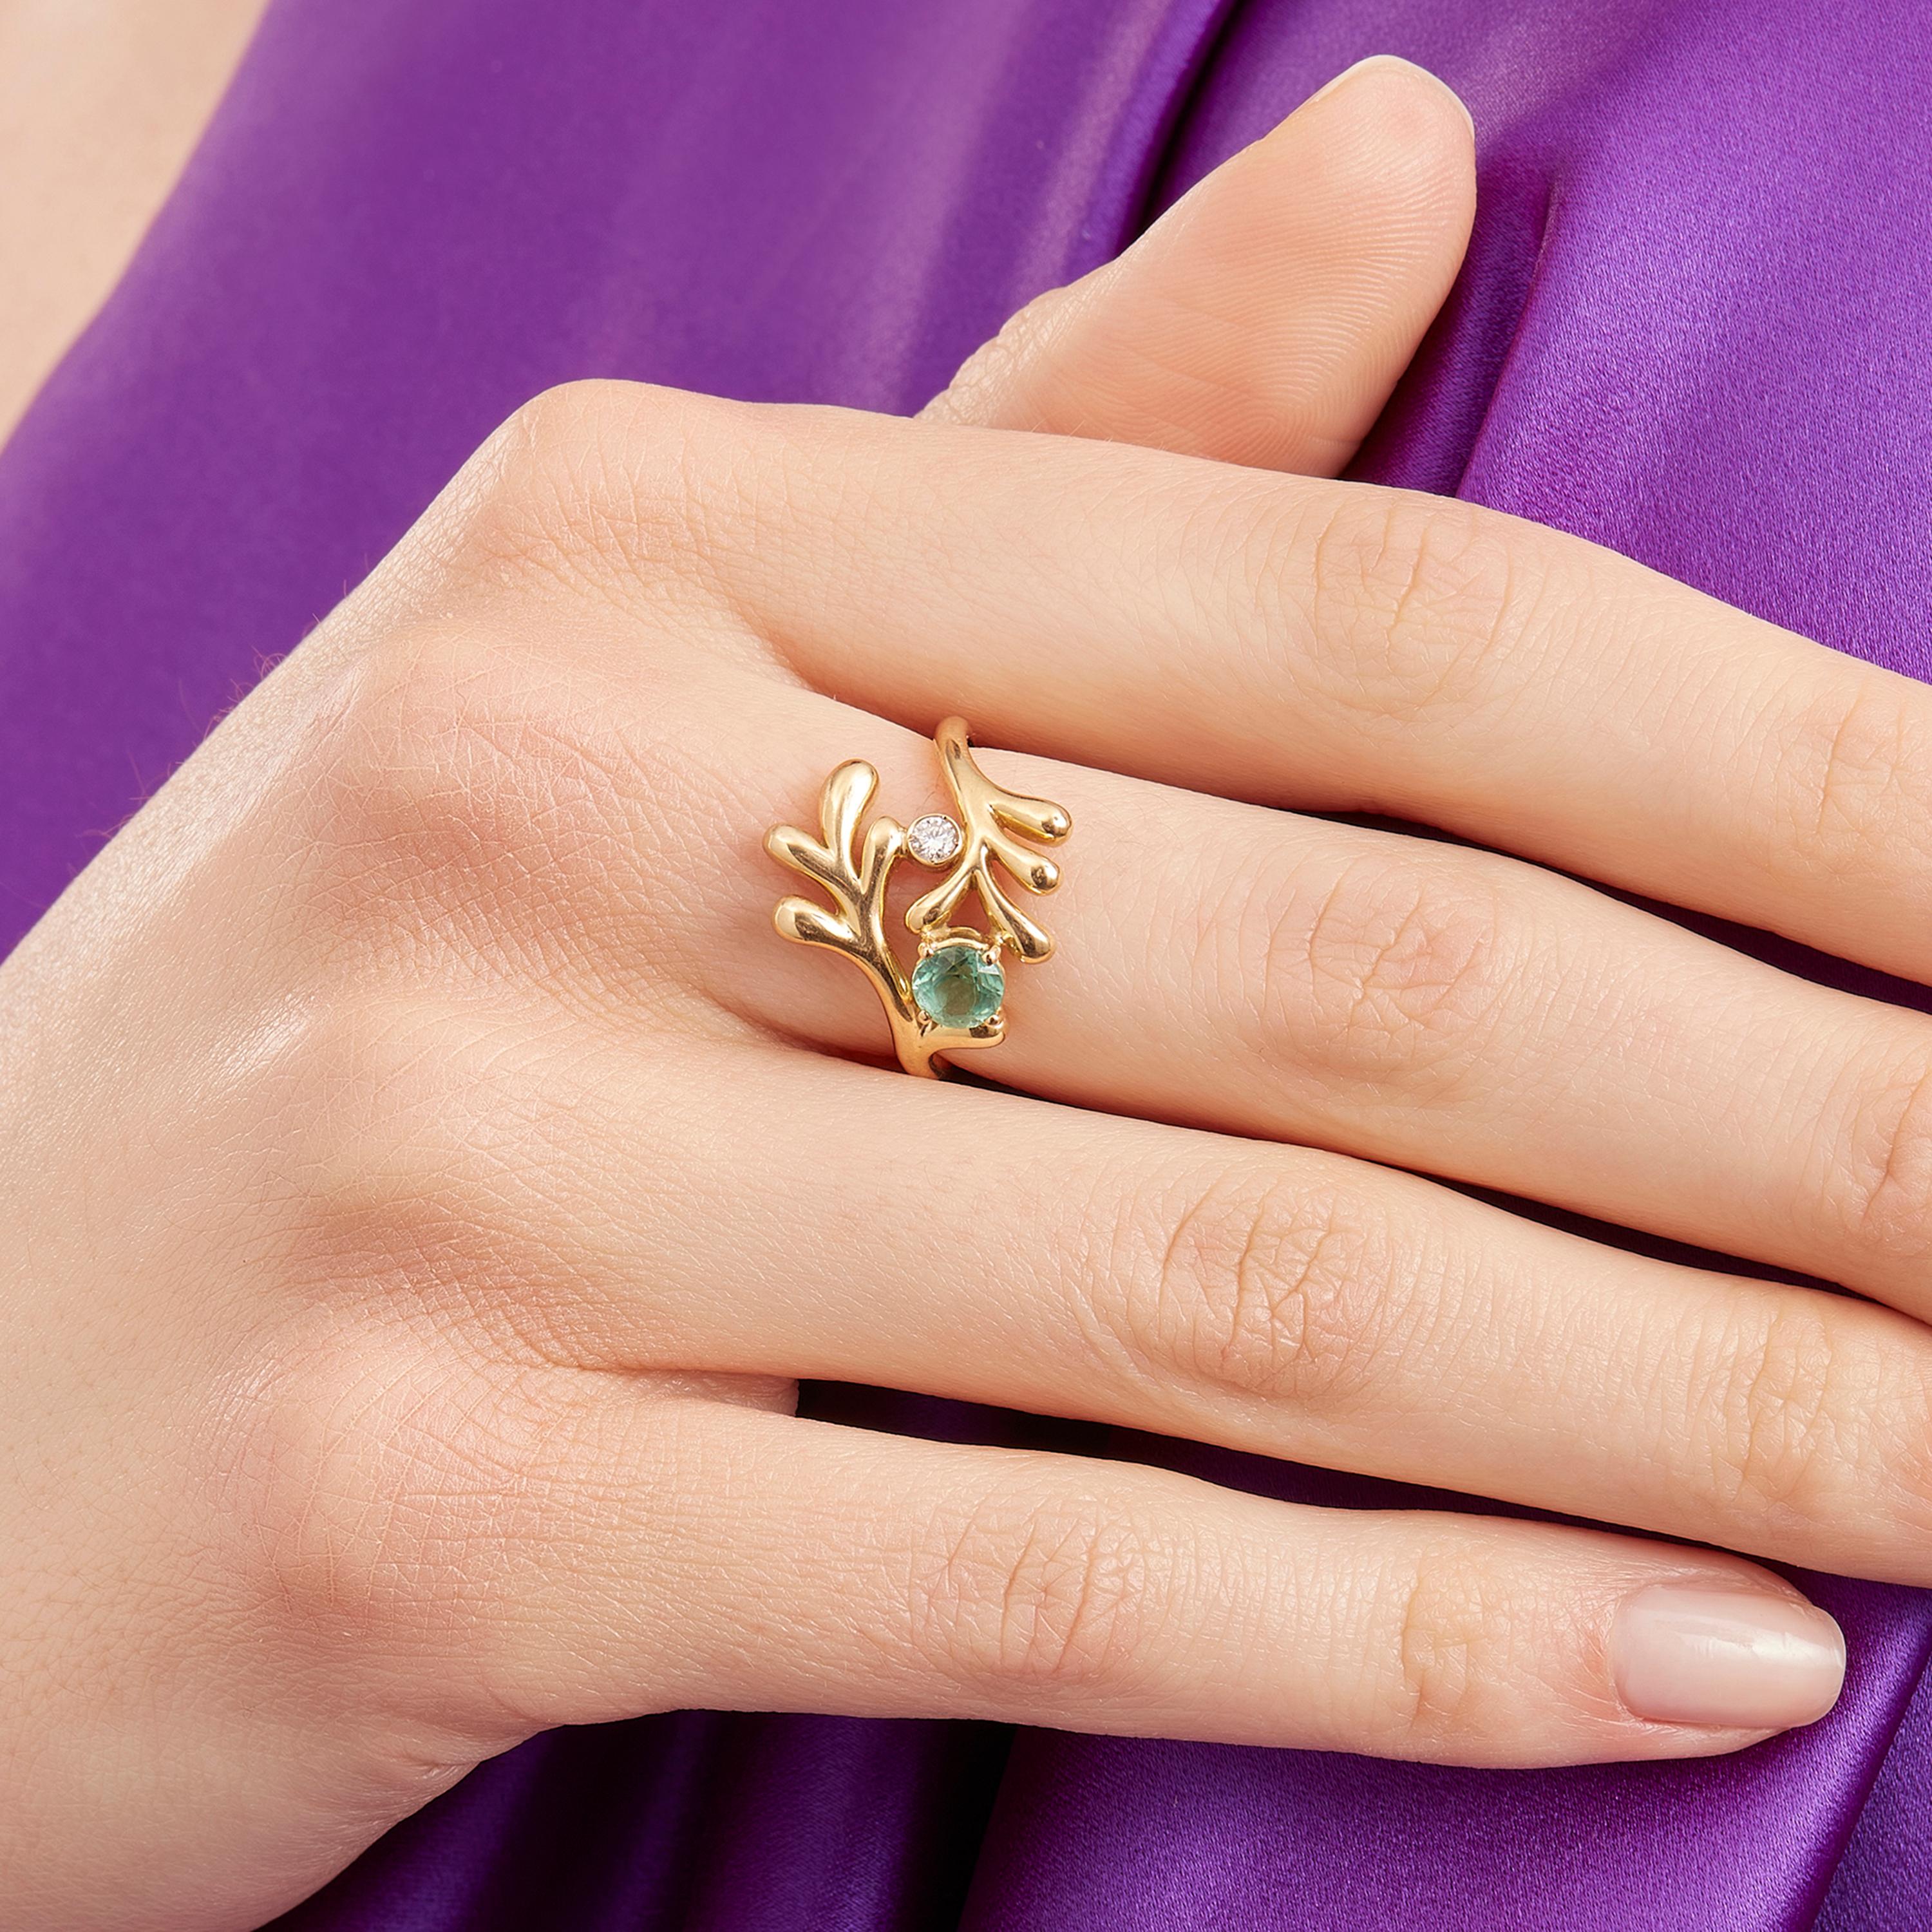 Springing forth from a lush magical wilderness is the JungleRemix ring with its clusters of gold leaves with well-rounded tips jingling and jangling to mimic the swaying movements of exotic flora in the heart of the rainforest. Cast as miniaturized